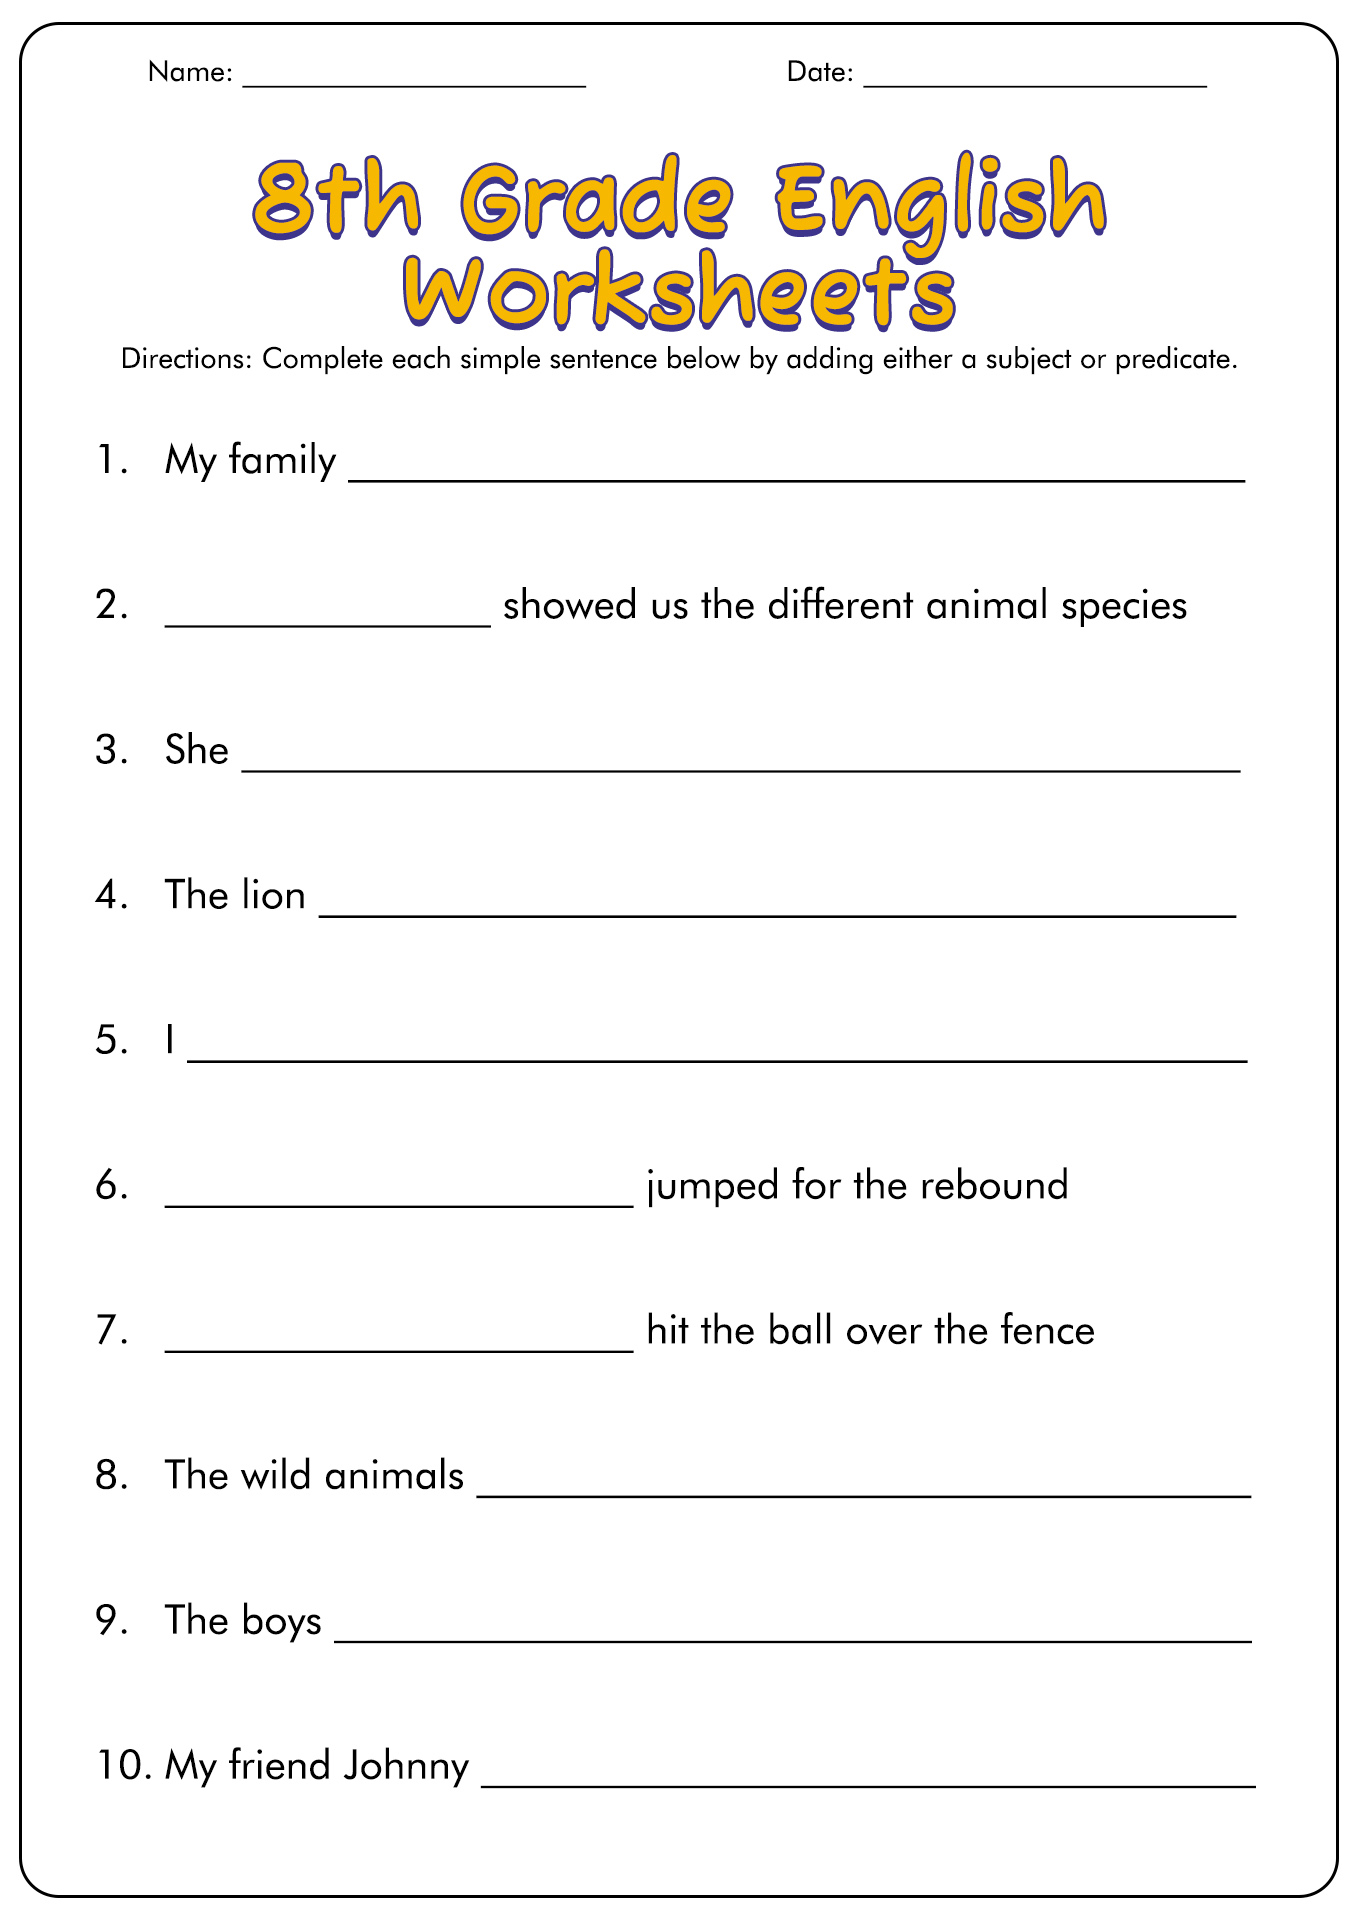 11-best-images-of-four-types-of-sentences-worksheets-four-sentence-types-worksheets-correct